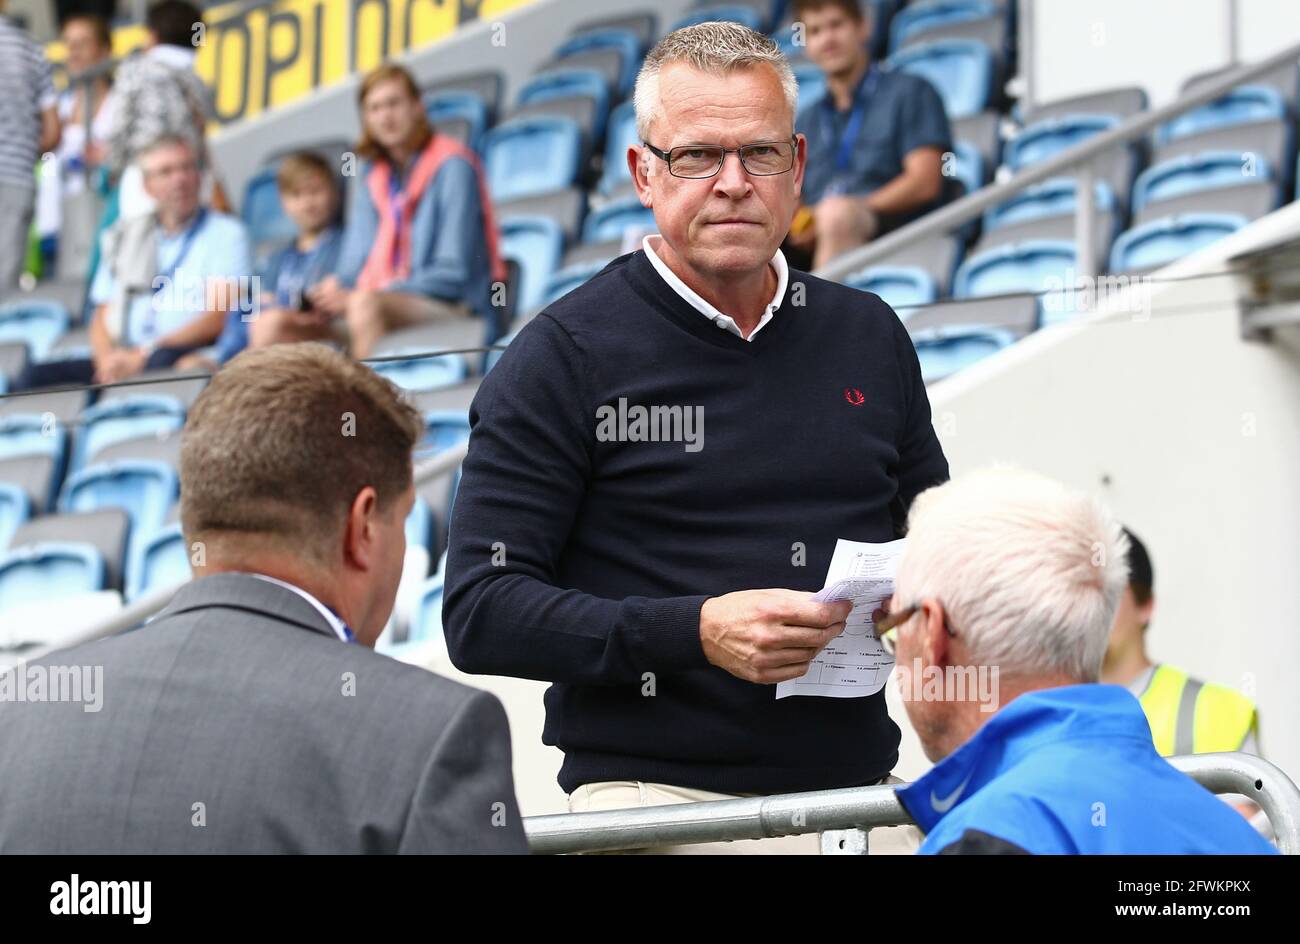 Jan Olof 'Janne' Andersson is a Swedish football coach who manages the Sweden national team. He is also a former player. Stock Photo